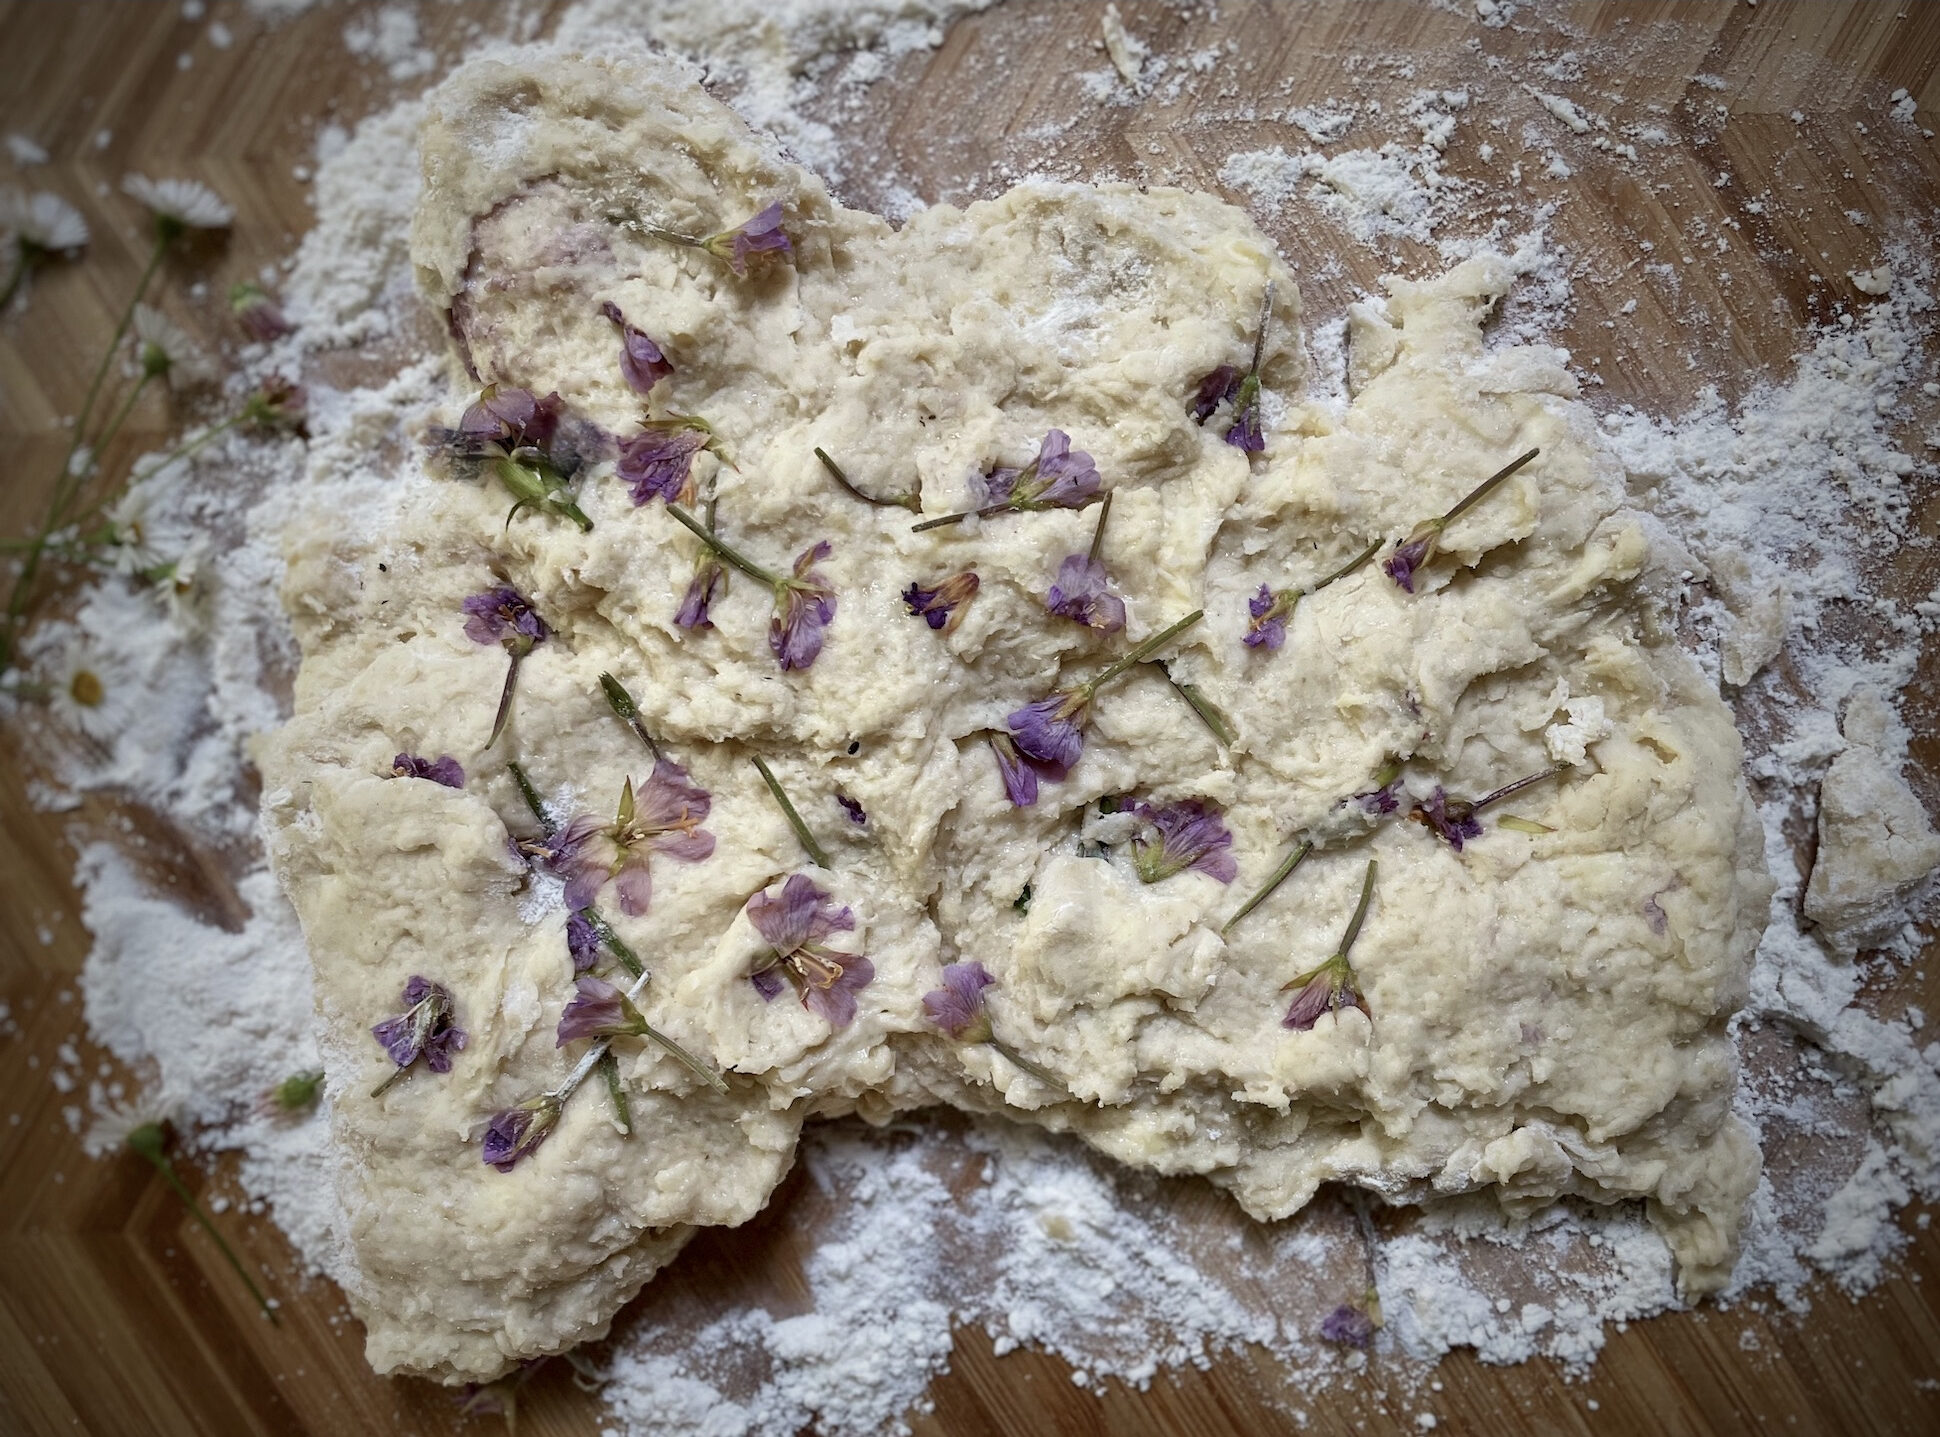 scone mix with Erigeron and fireweed flowers